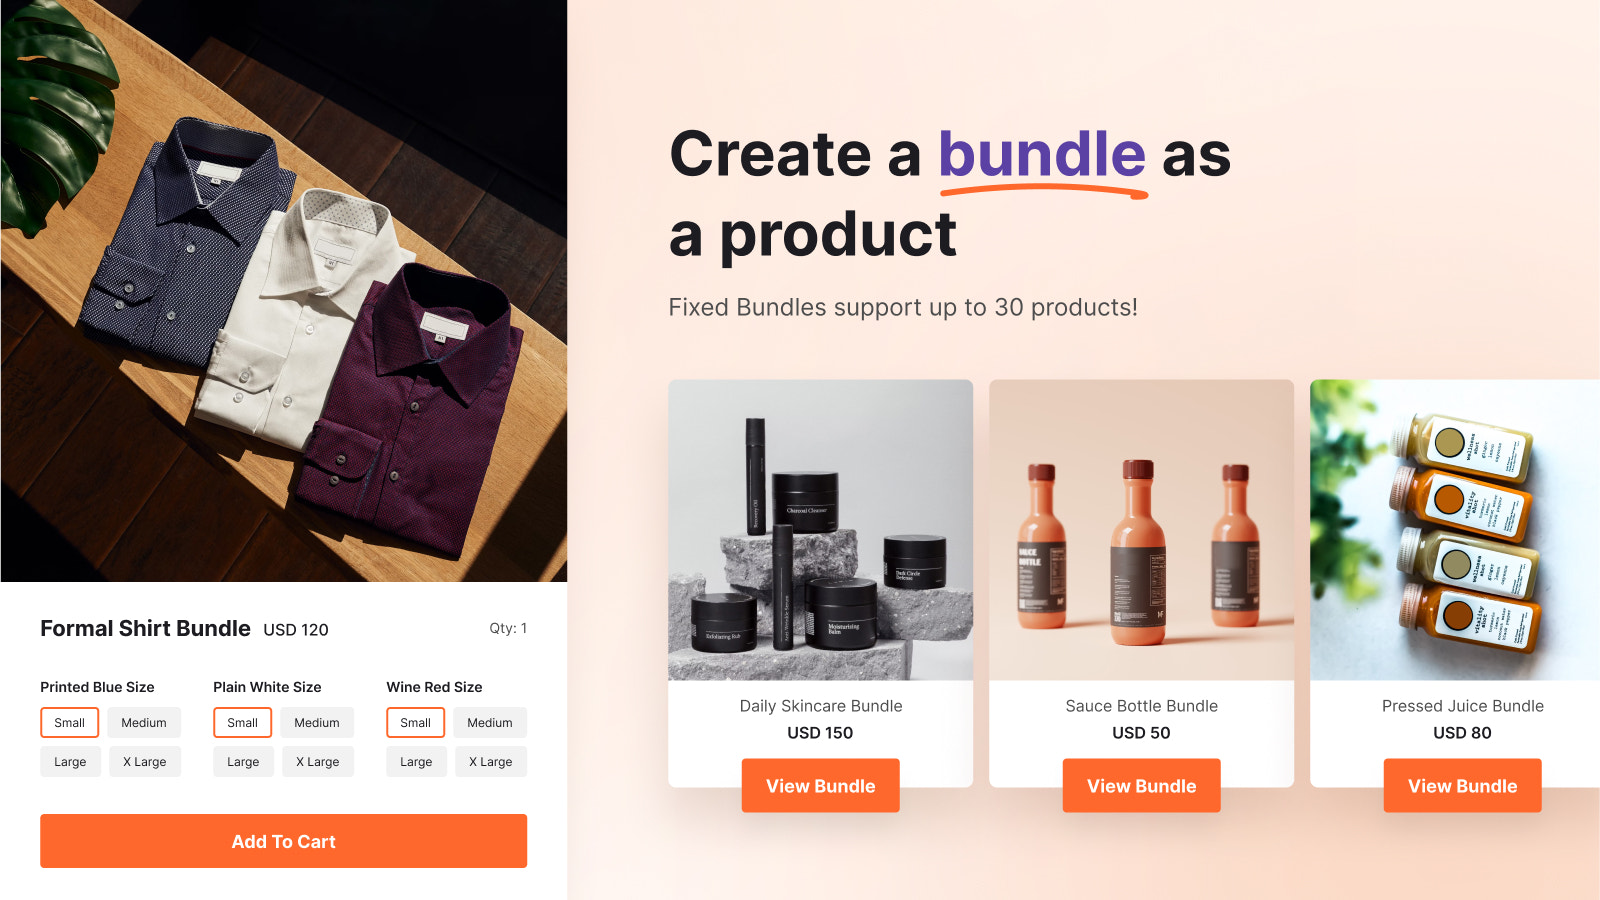 Create a bundle as a product with Fixed Bundles